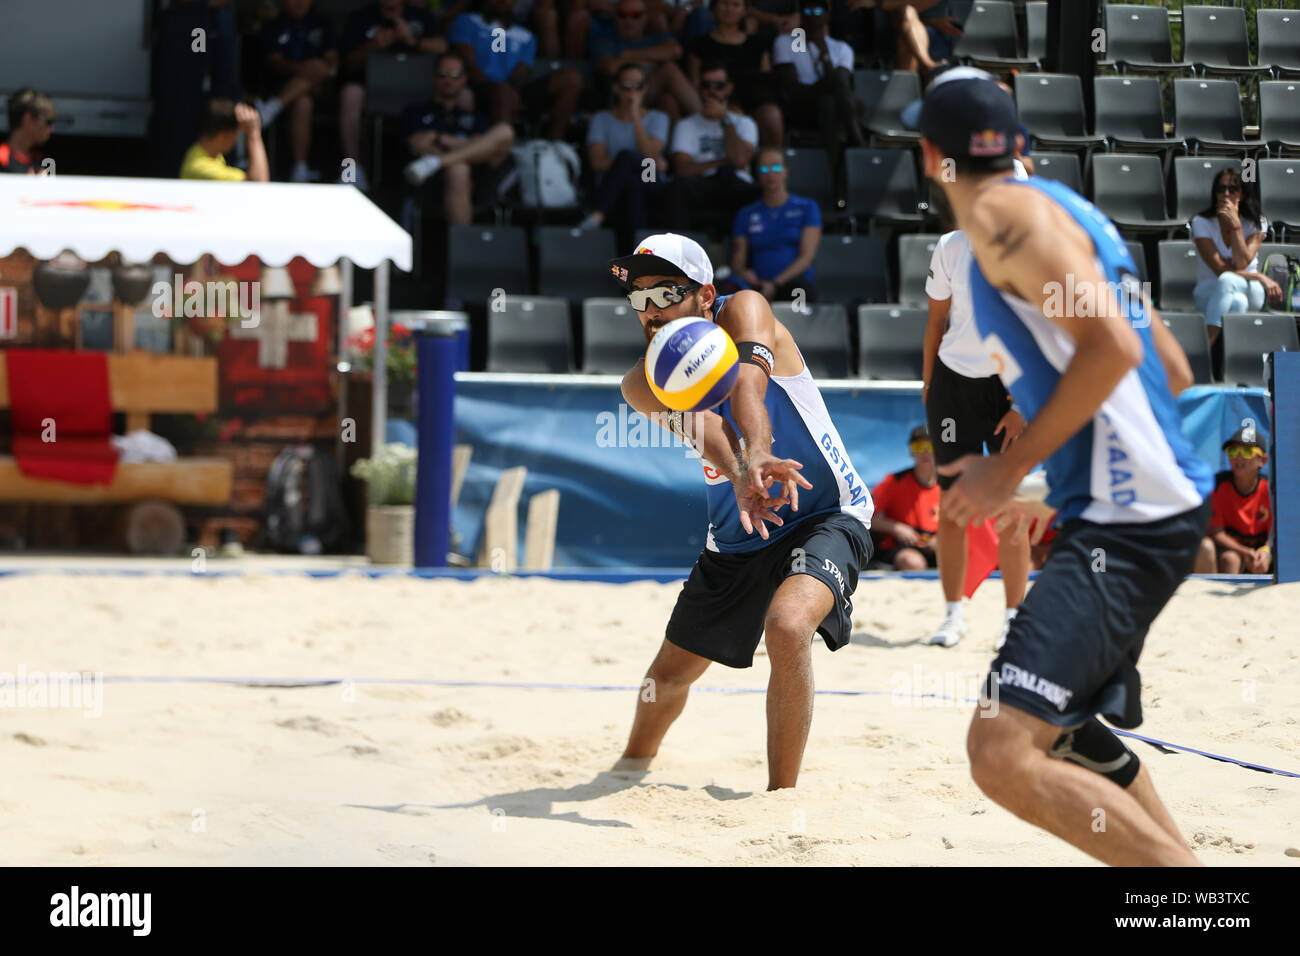 RICEZIONE DE DANIELE LUPO lors de Gstaad Grand 2019 - Jour 5 - Demi-finales - Uomini, Gstaad, Italie, 13 juillet 2019, le volley-ball Beach Volley Banque D'Images